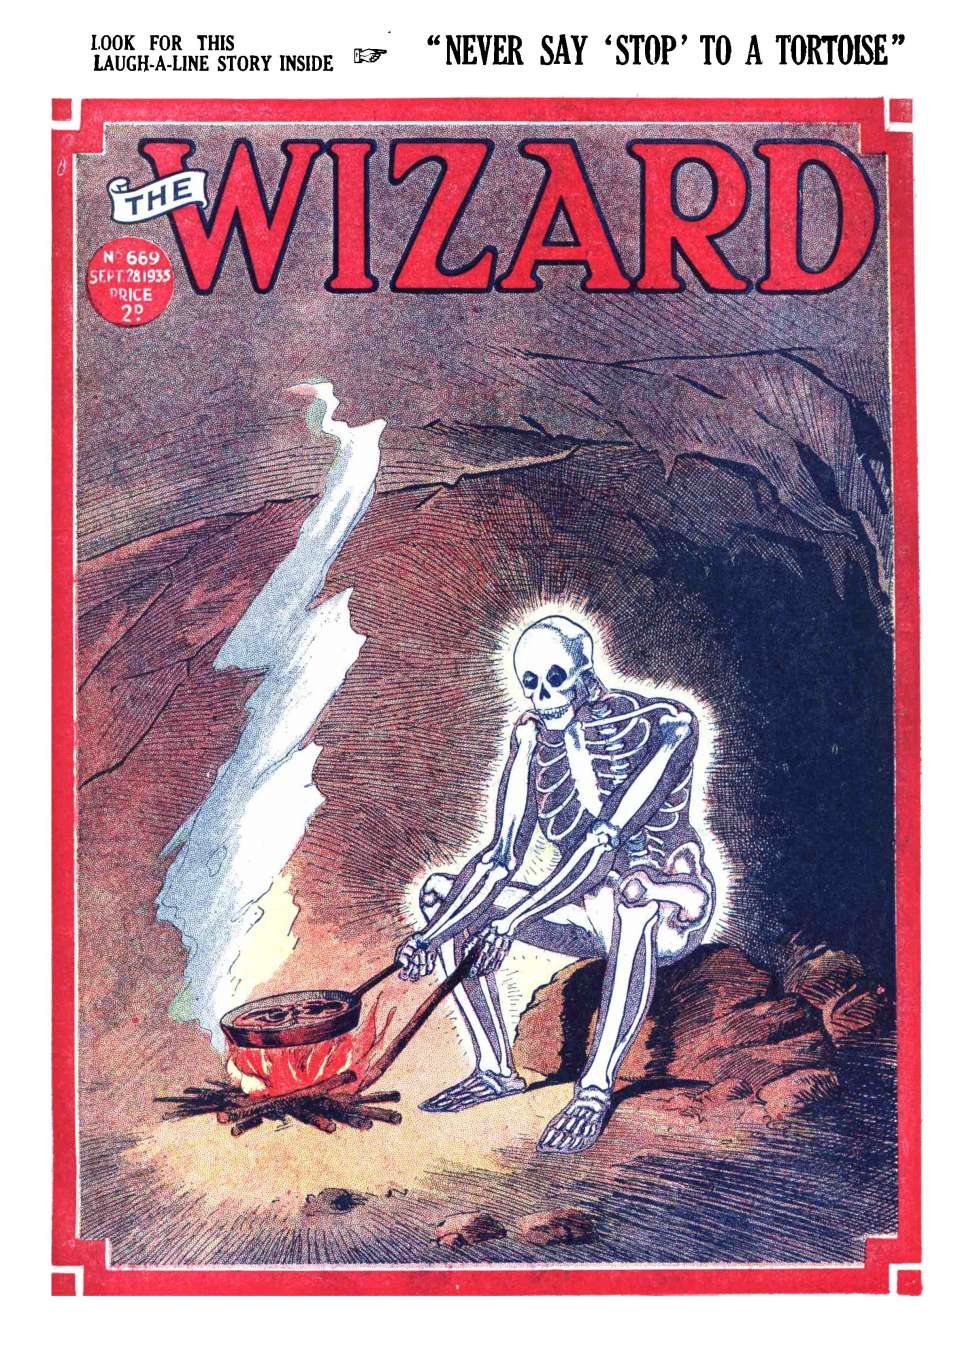 Book Cover For The Wizard 669